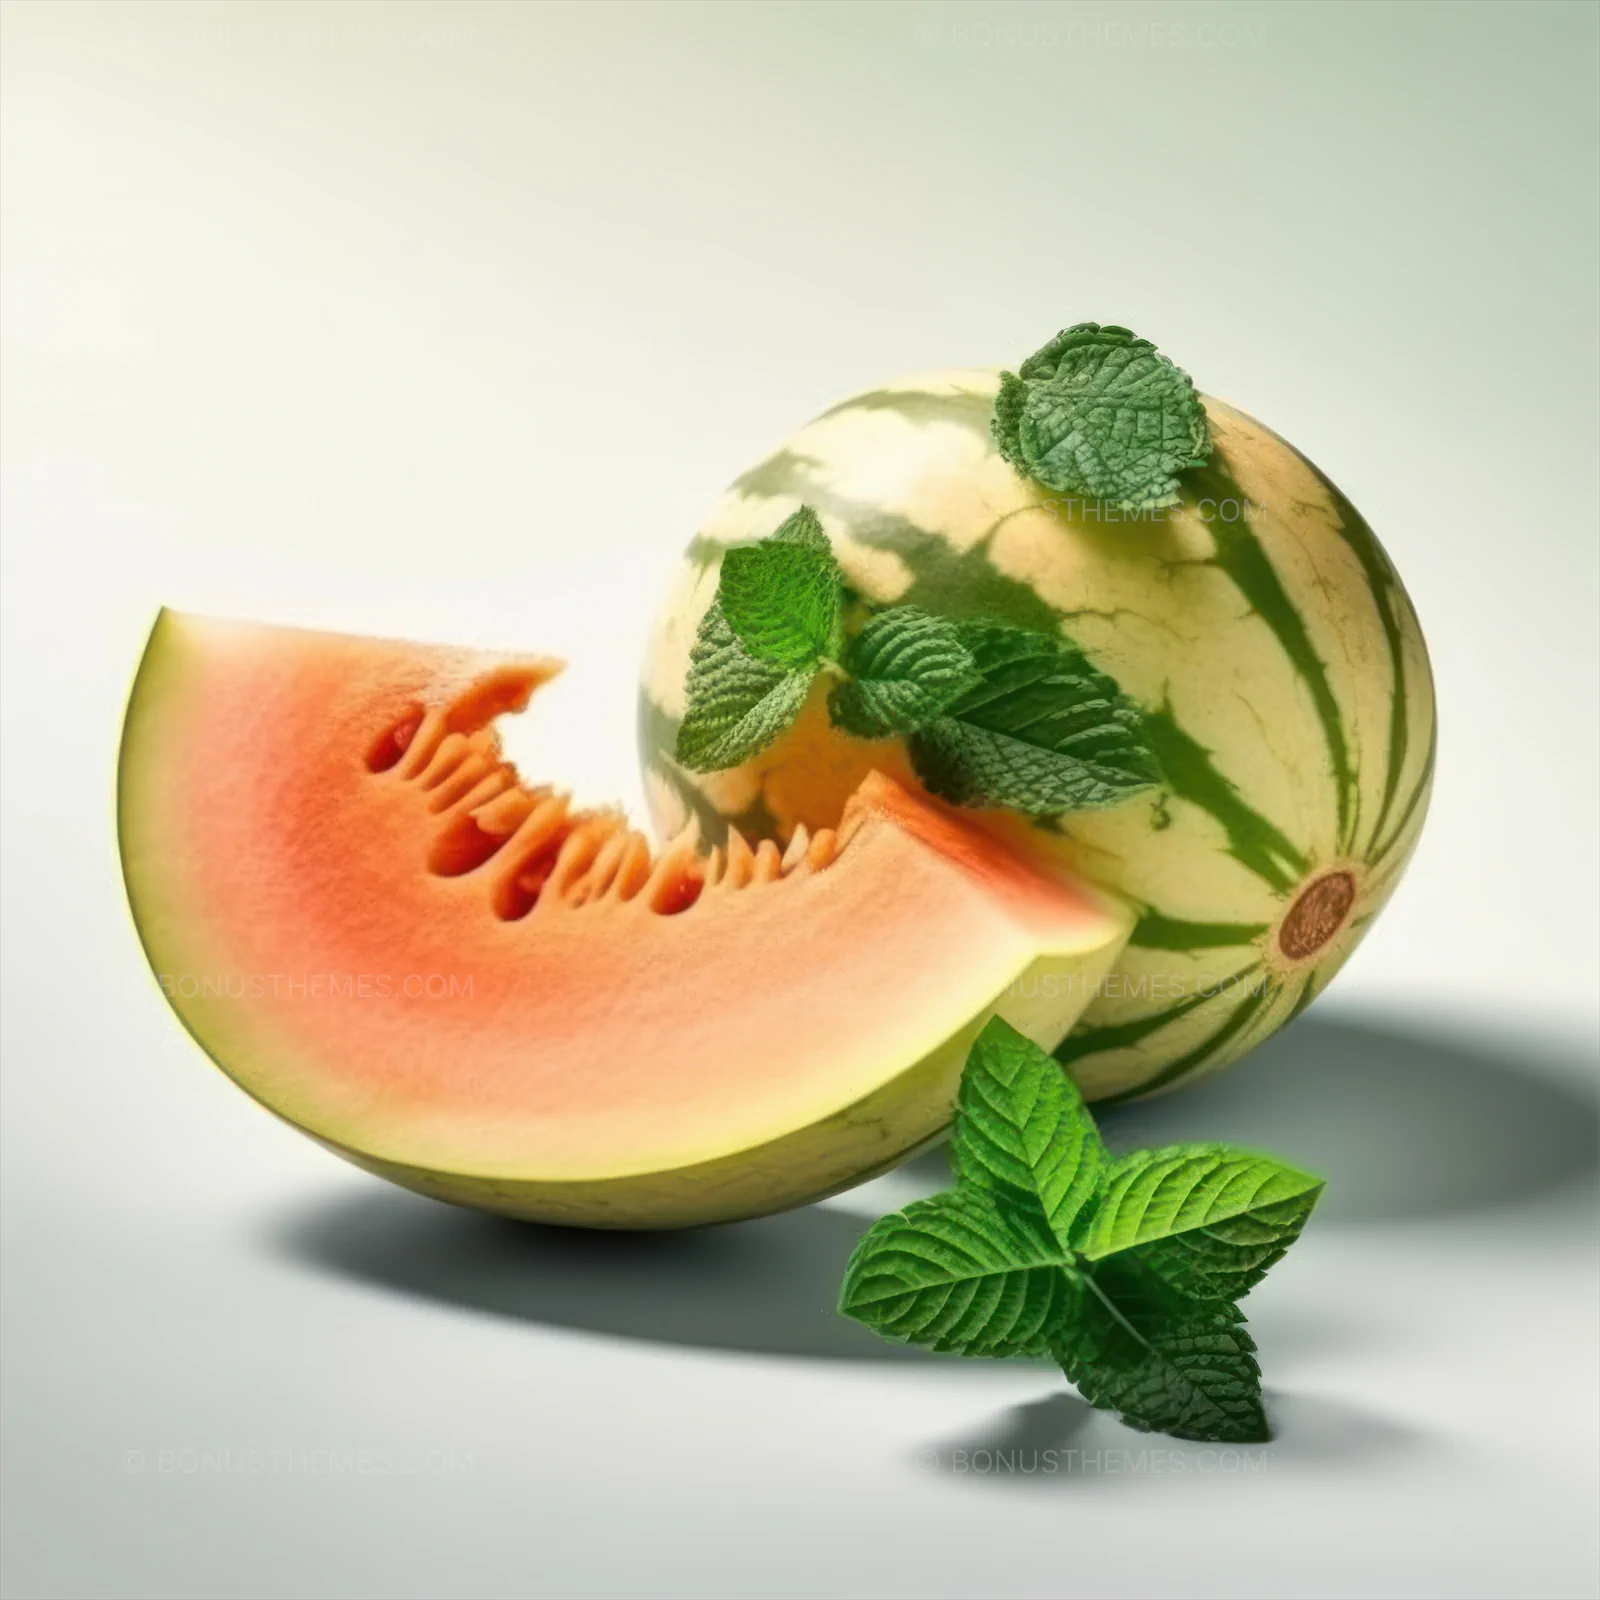 Slice of fresh melon with leaves